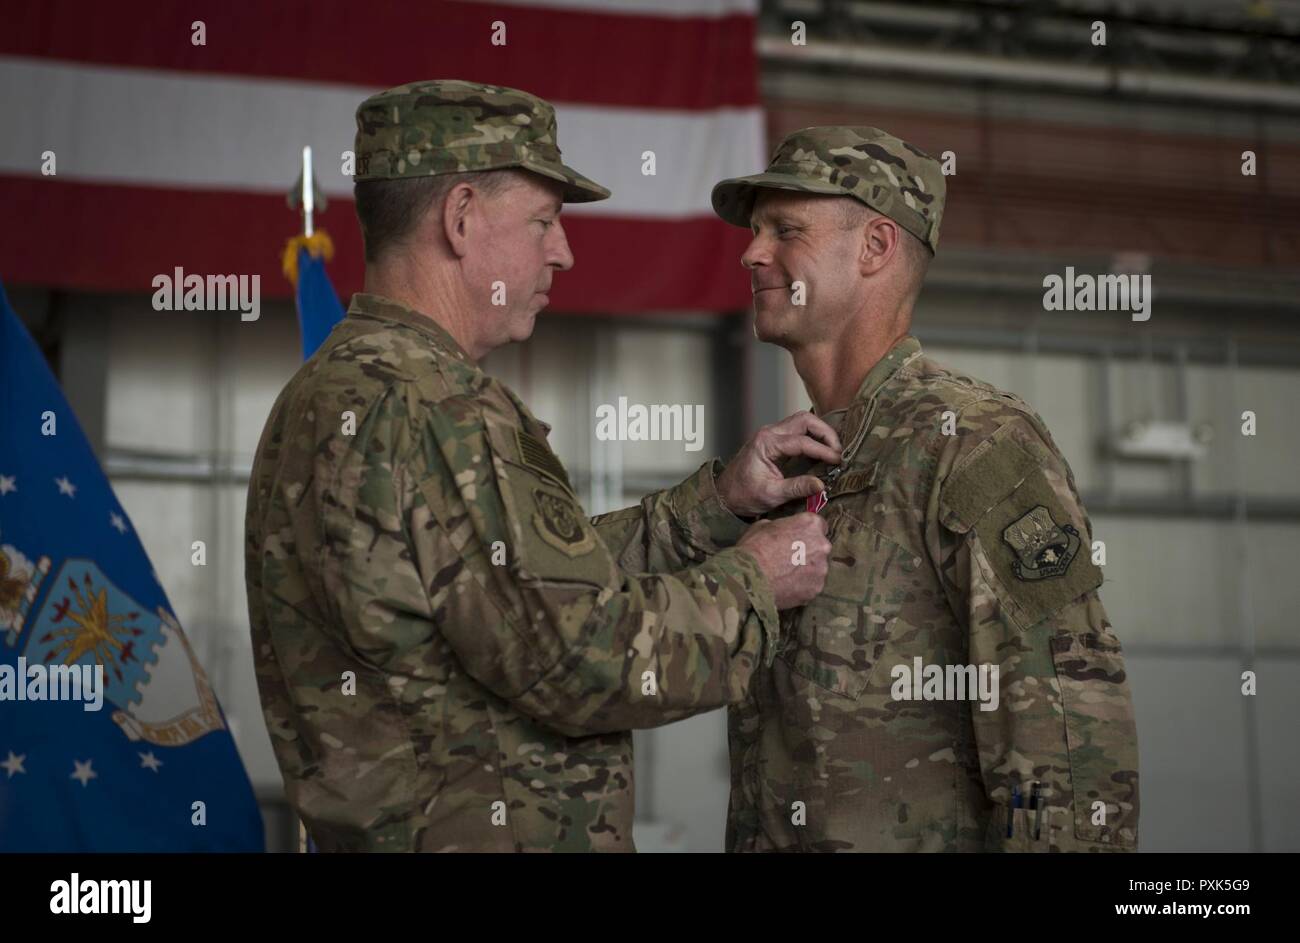 Brig. Gen. Jim Sears, the outgoing 455th Air Expeditionary Wing commander, receives the Bronze Star Medal from Maj. Gen. James Hecker, the 9th Air and Space Expeditionary Task Force-Afghanistan commander, during a change of command ceremony at Bagram Airfield, Afghanistan, June 3, 2017. Sears commanded the 455th AEW for the last 12 months. During his time at Bagram, Sears’ leadership enabled 15,800 combat sorties, accumulating to 102,877 combat hours, which resulted in more than 1,369 kinetic strike and 2,836 enemies killed in action. Stock Photo